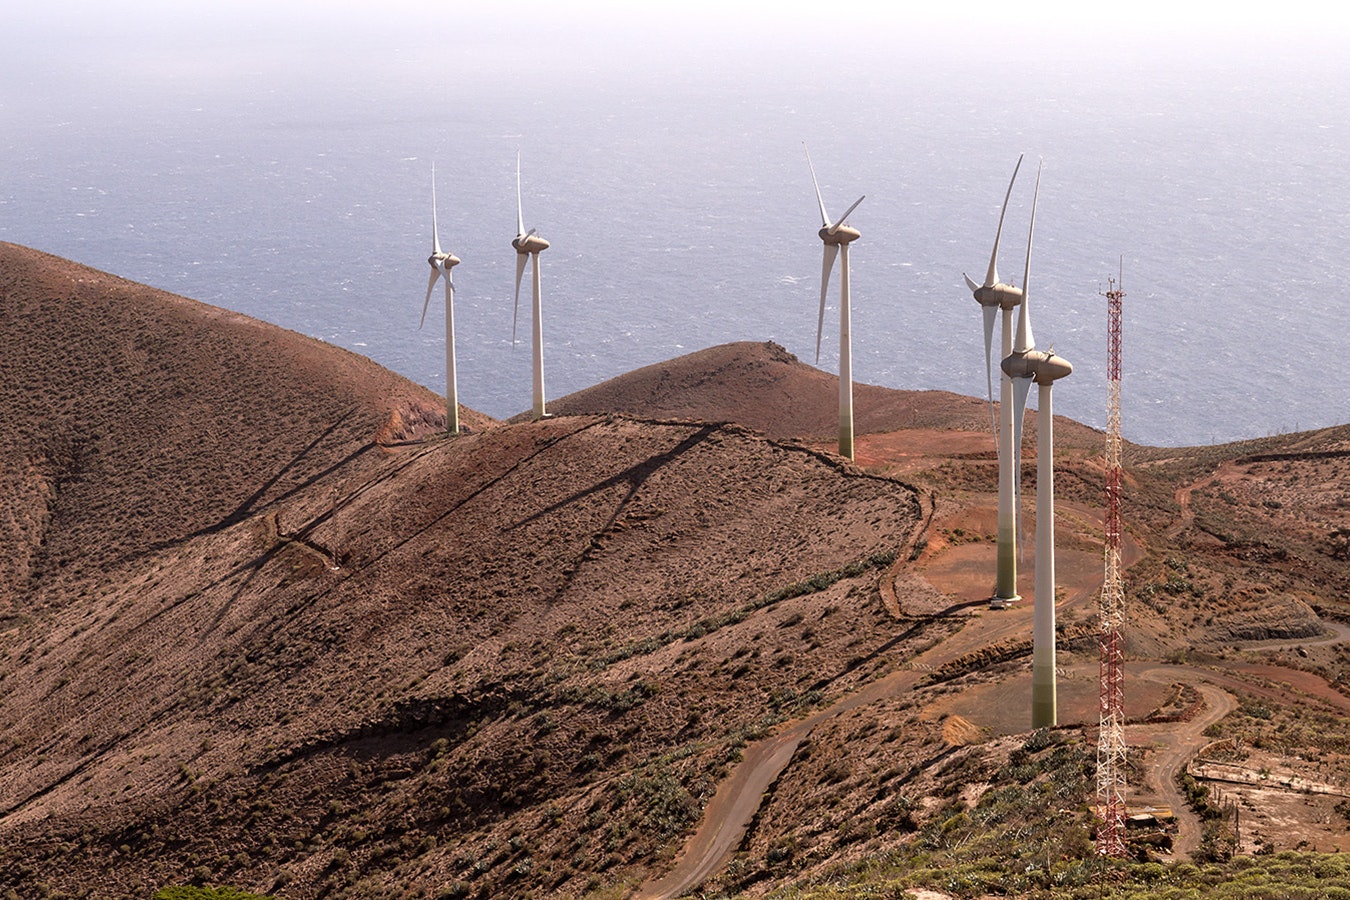 The island of El Hierro in the Canary Islands bills itself as being 100% powered by renewable energy, but in reality it only produced less than 15% of its power in 2020.